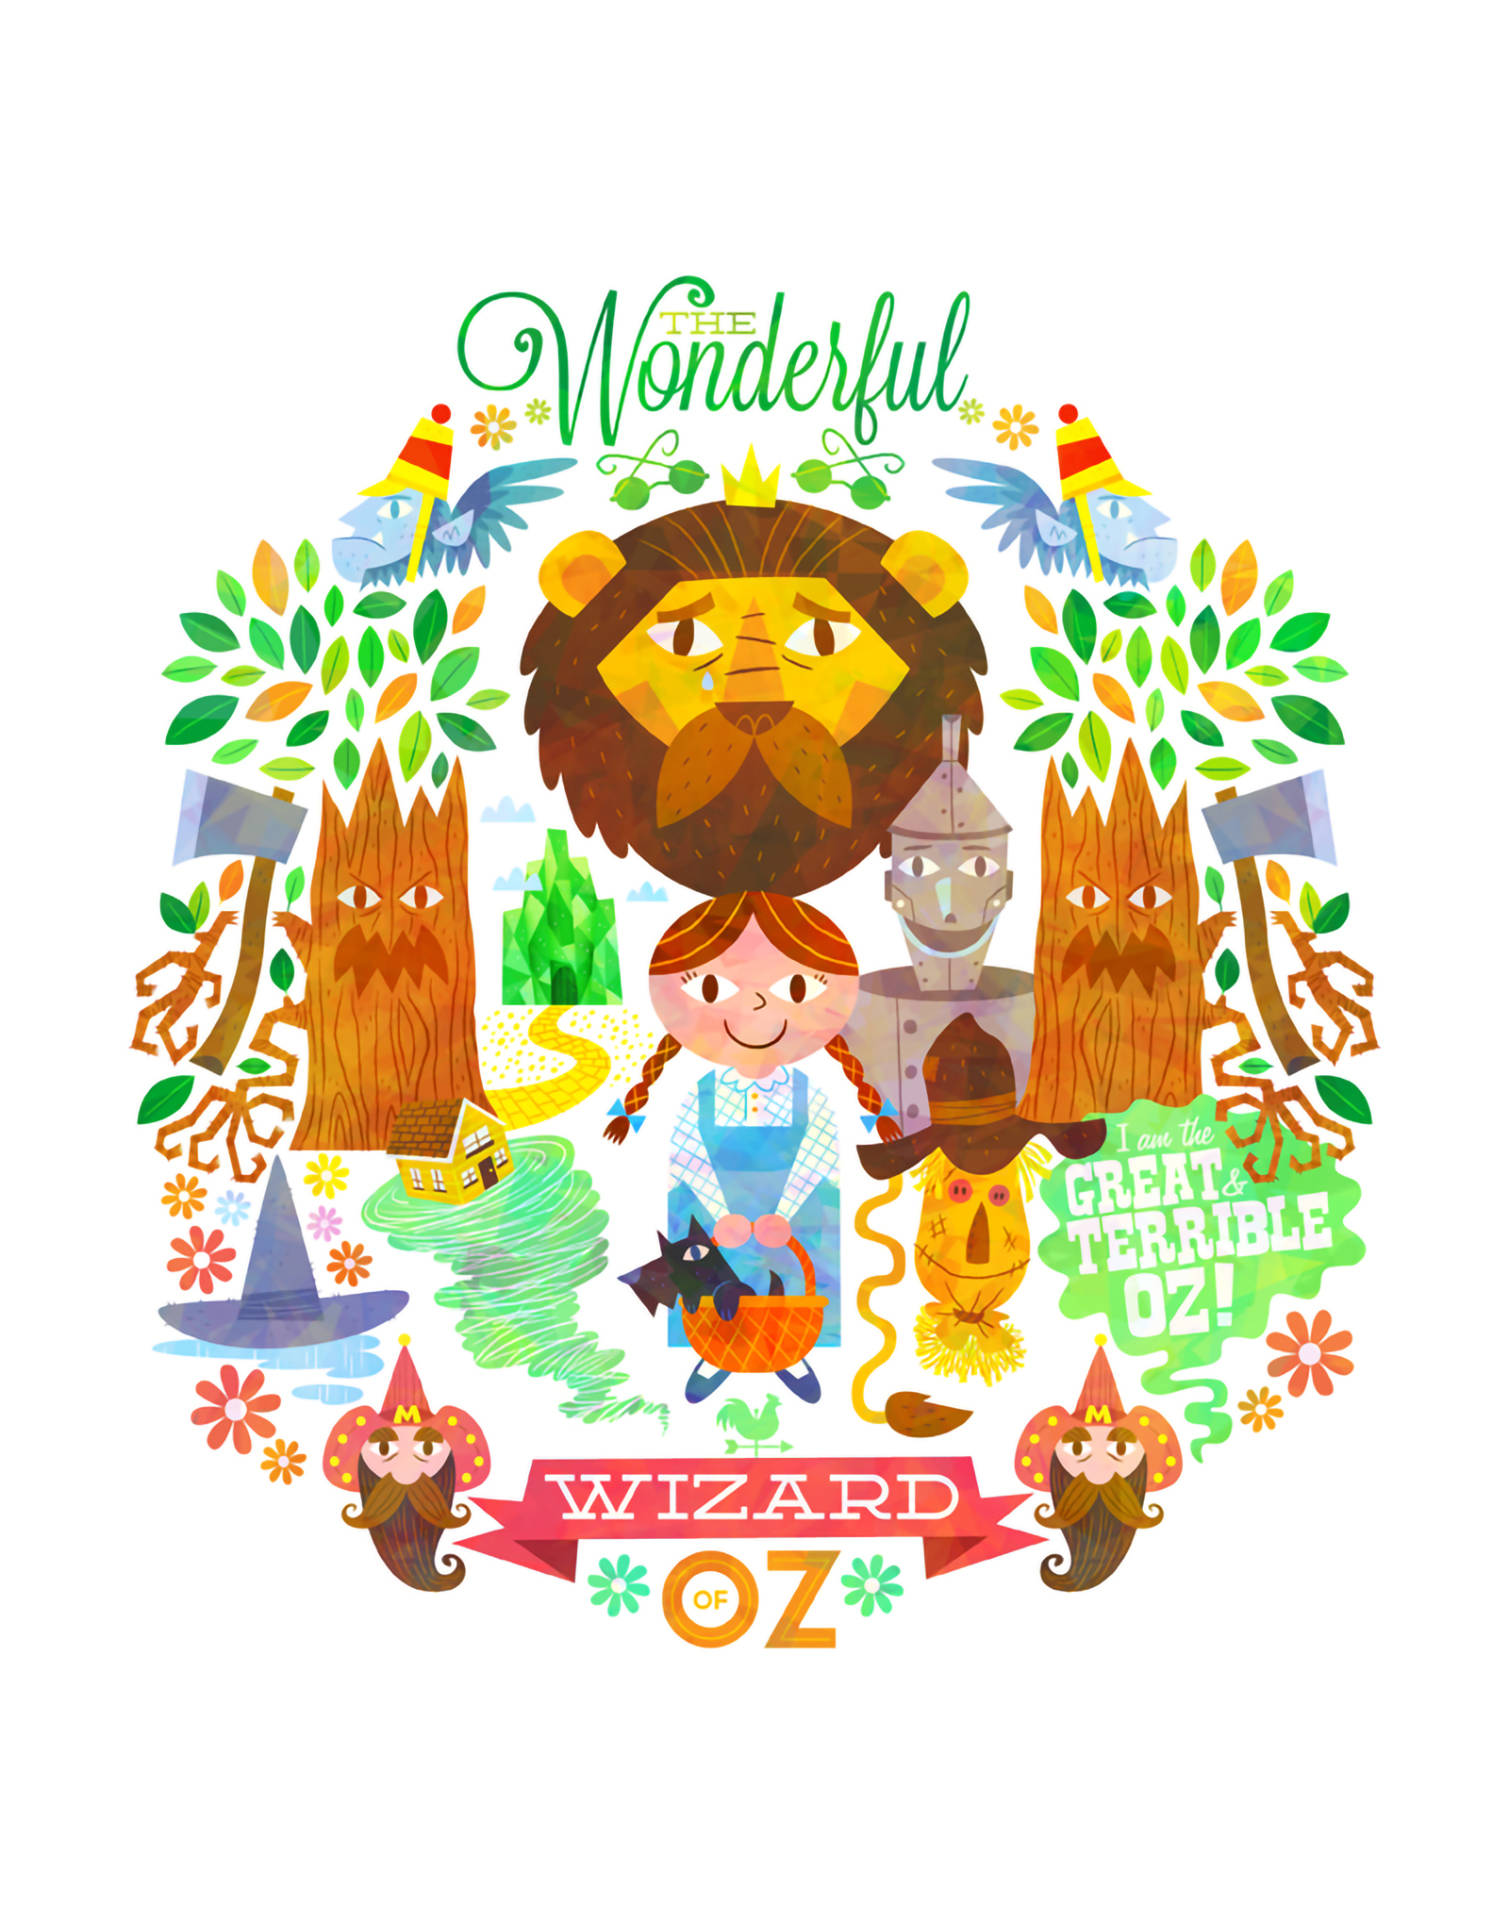 Magical journey of Dorothy in the Wizard of Oz. Wallpaper